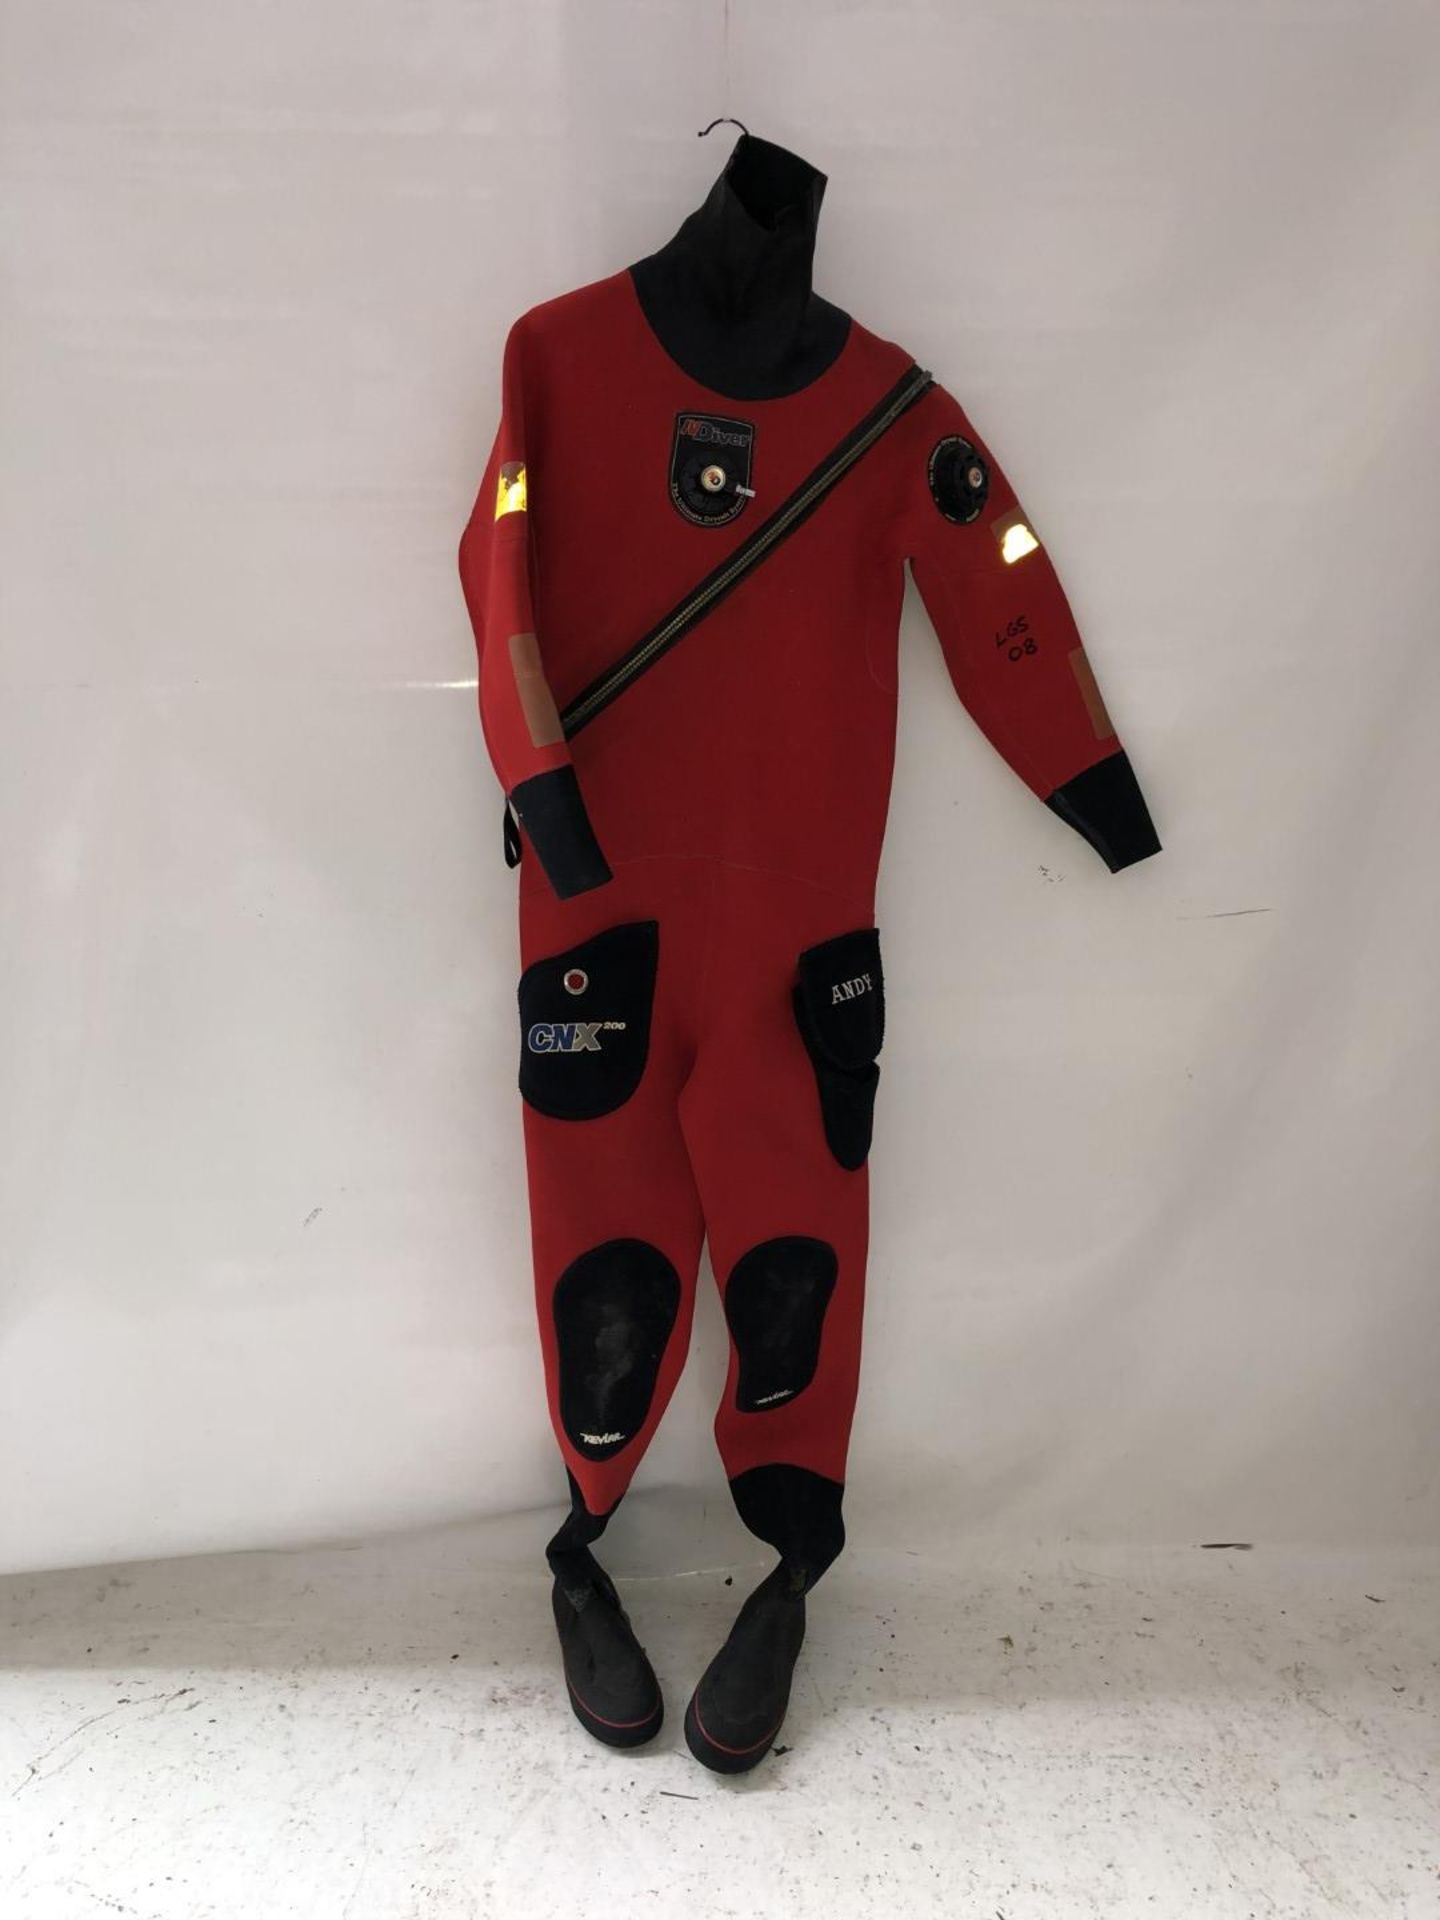 1 x Large Red NorthernDiver Wetsuit - Ref: NS339 - CL349 - Altrincham WA14